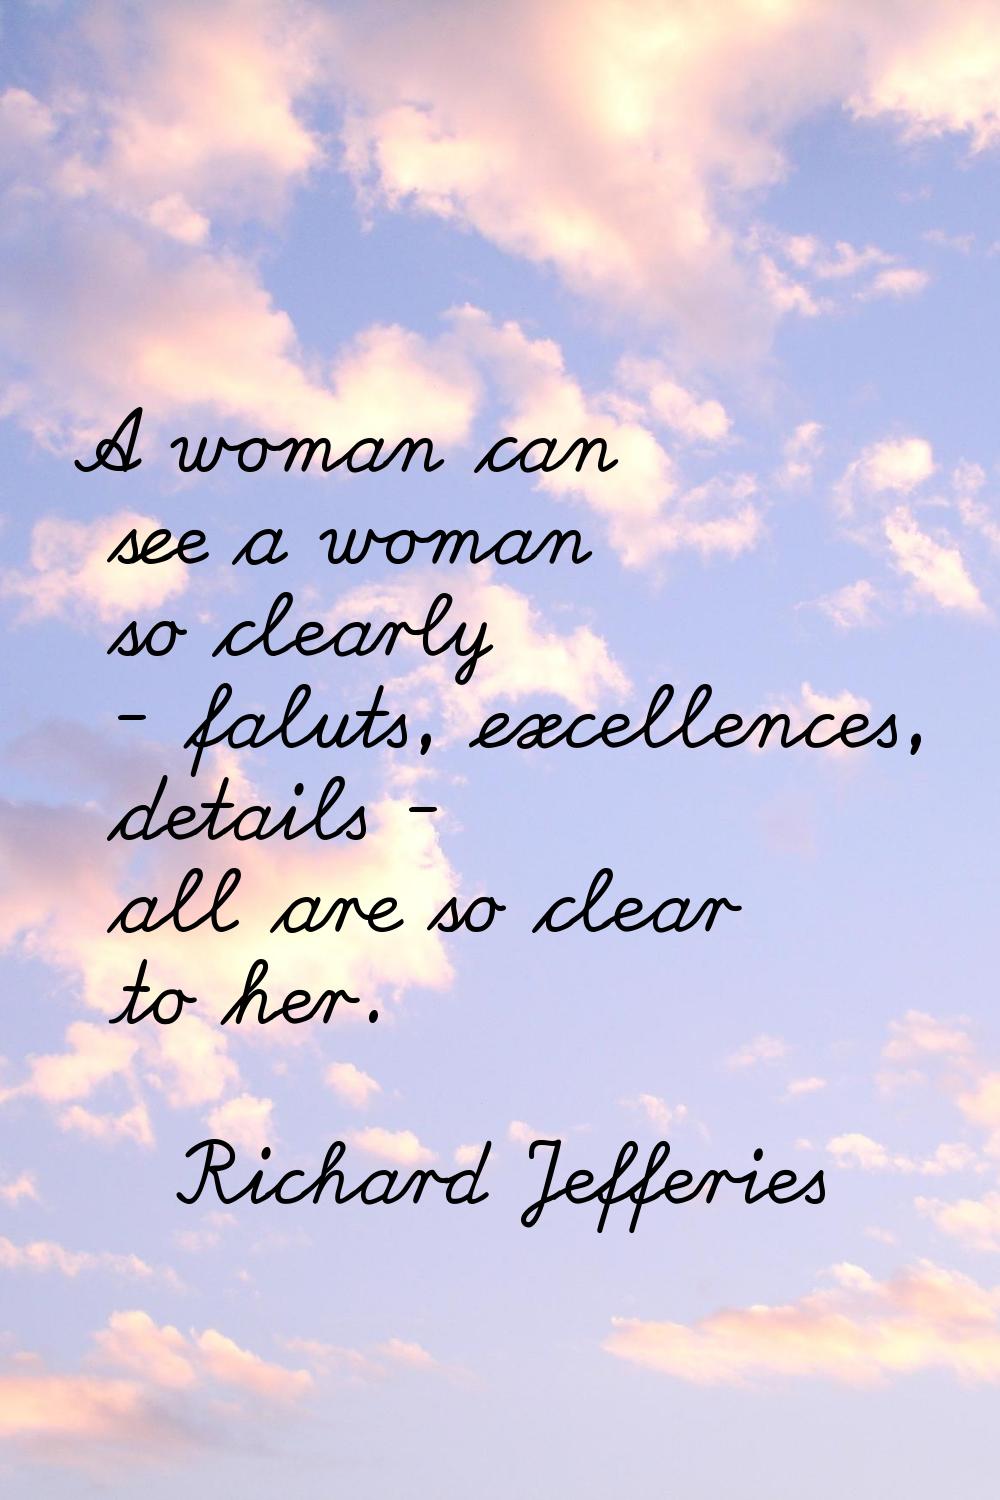 A woman can see a woman so clearly - faluts, excellences, details - all are so clear to her.